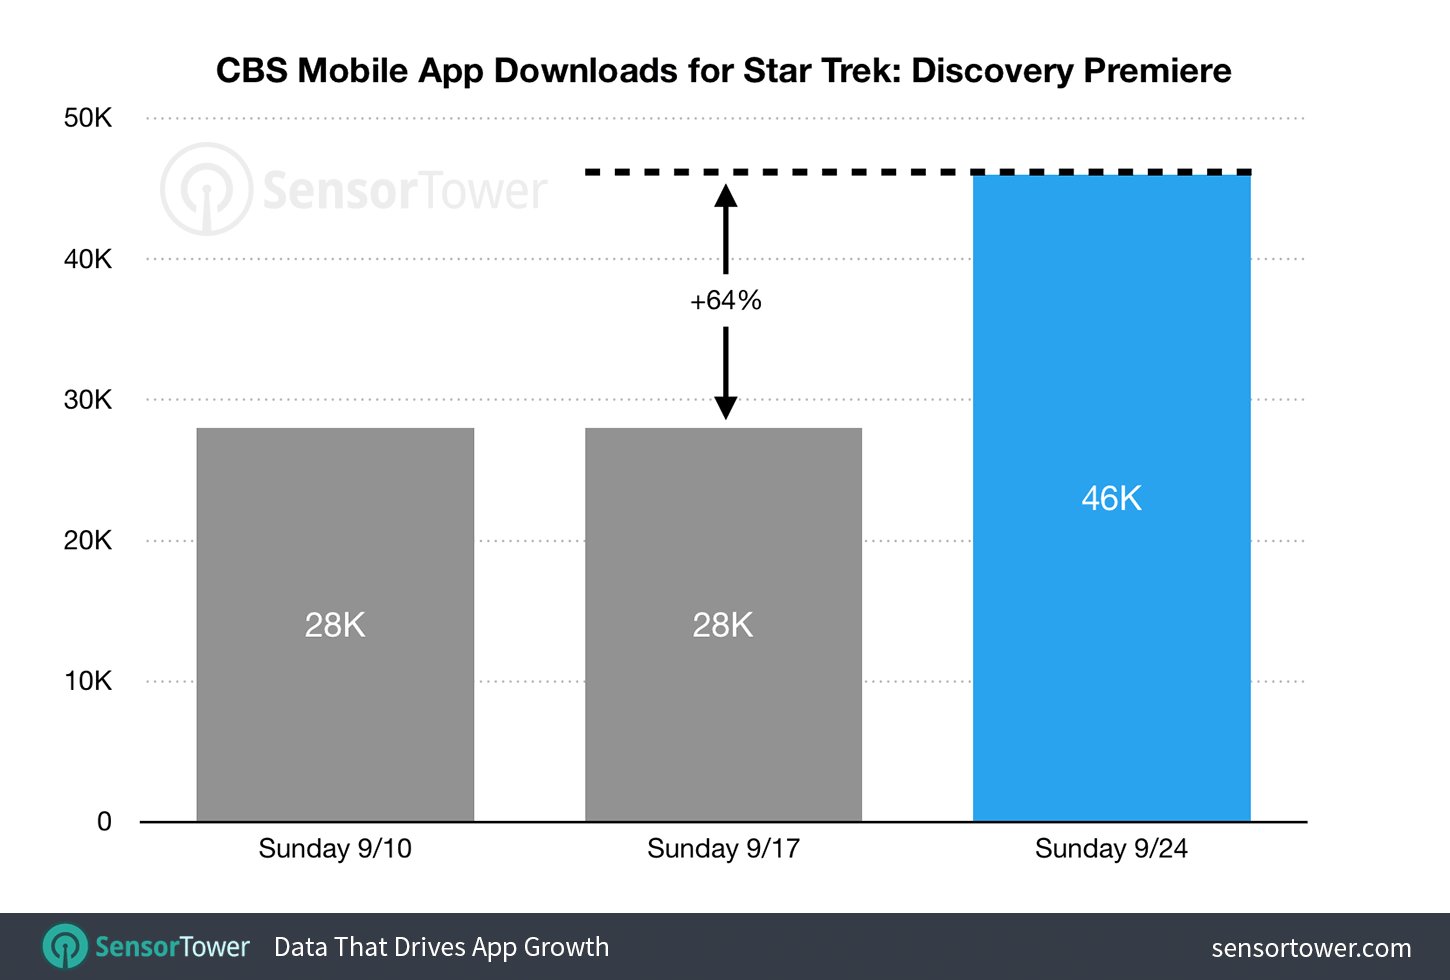 CBS mobile app downloads for Star Trek Discovery premiere on September 24, 2017 compared to the two preceding Sundays